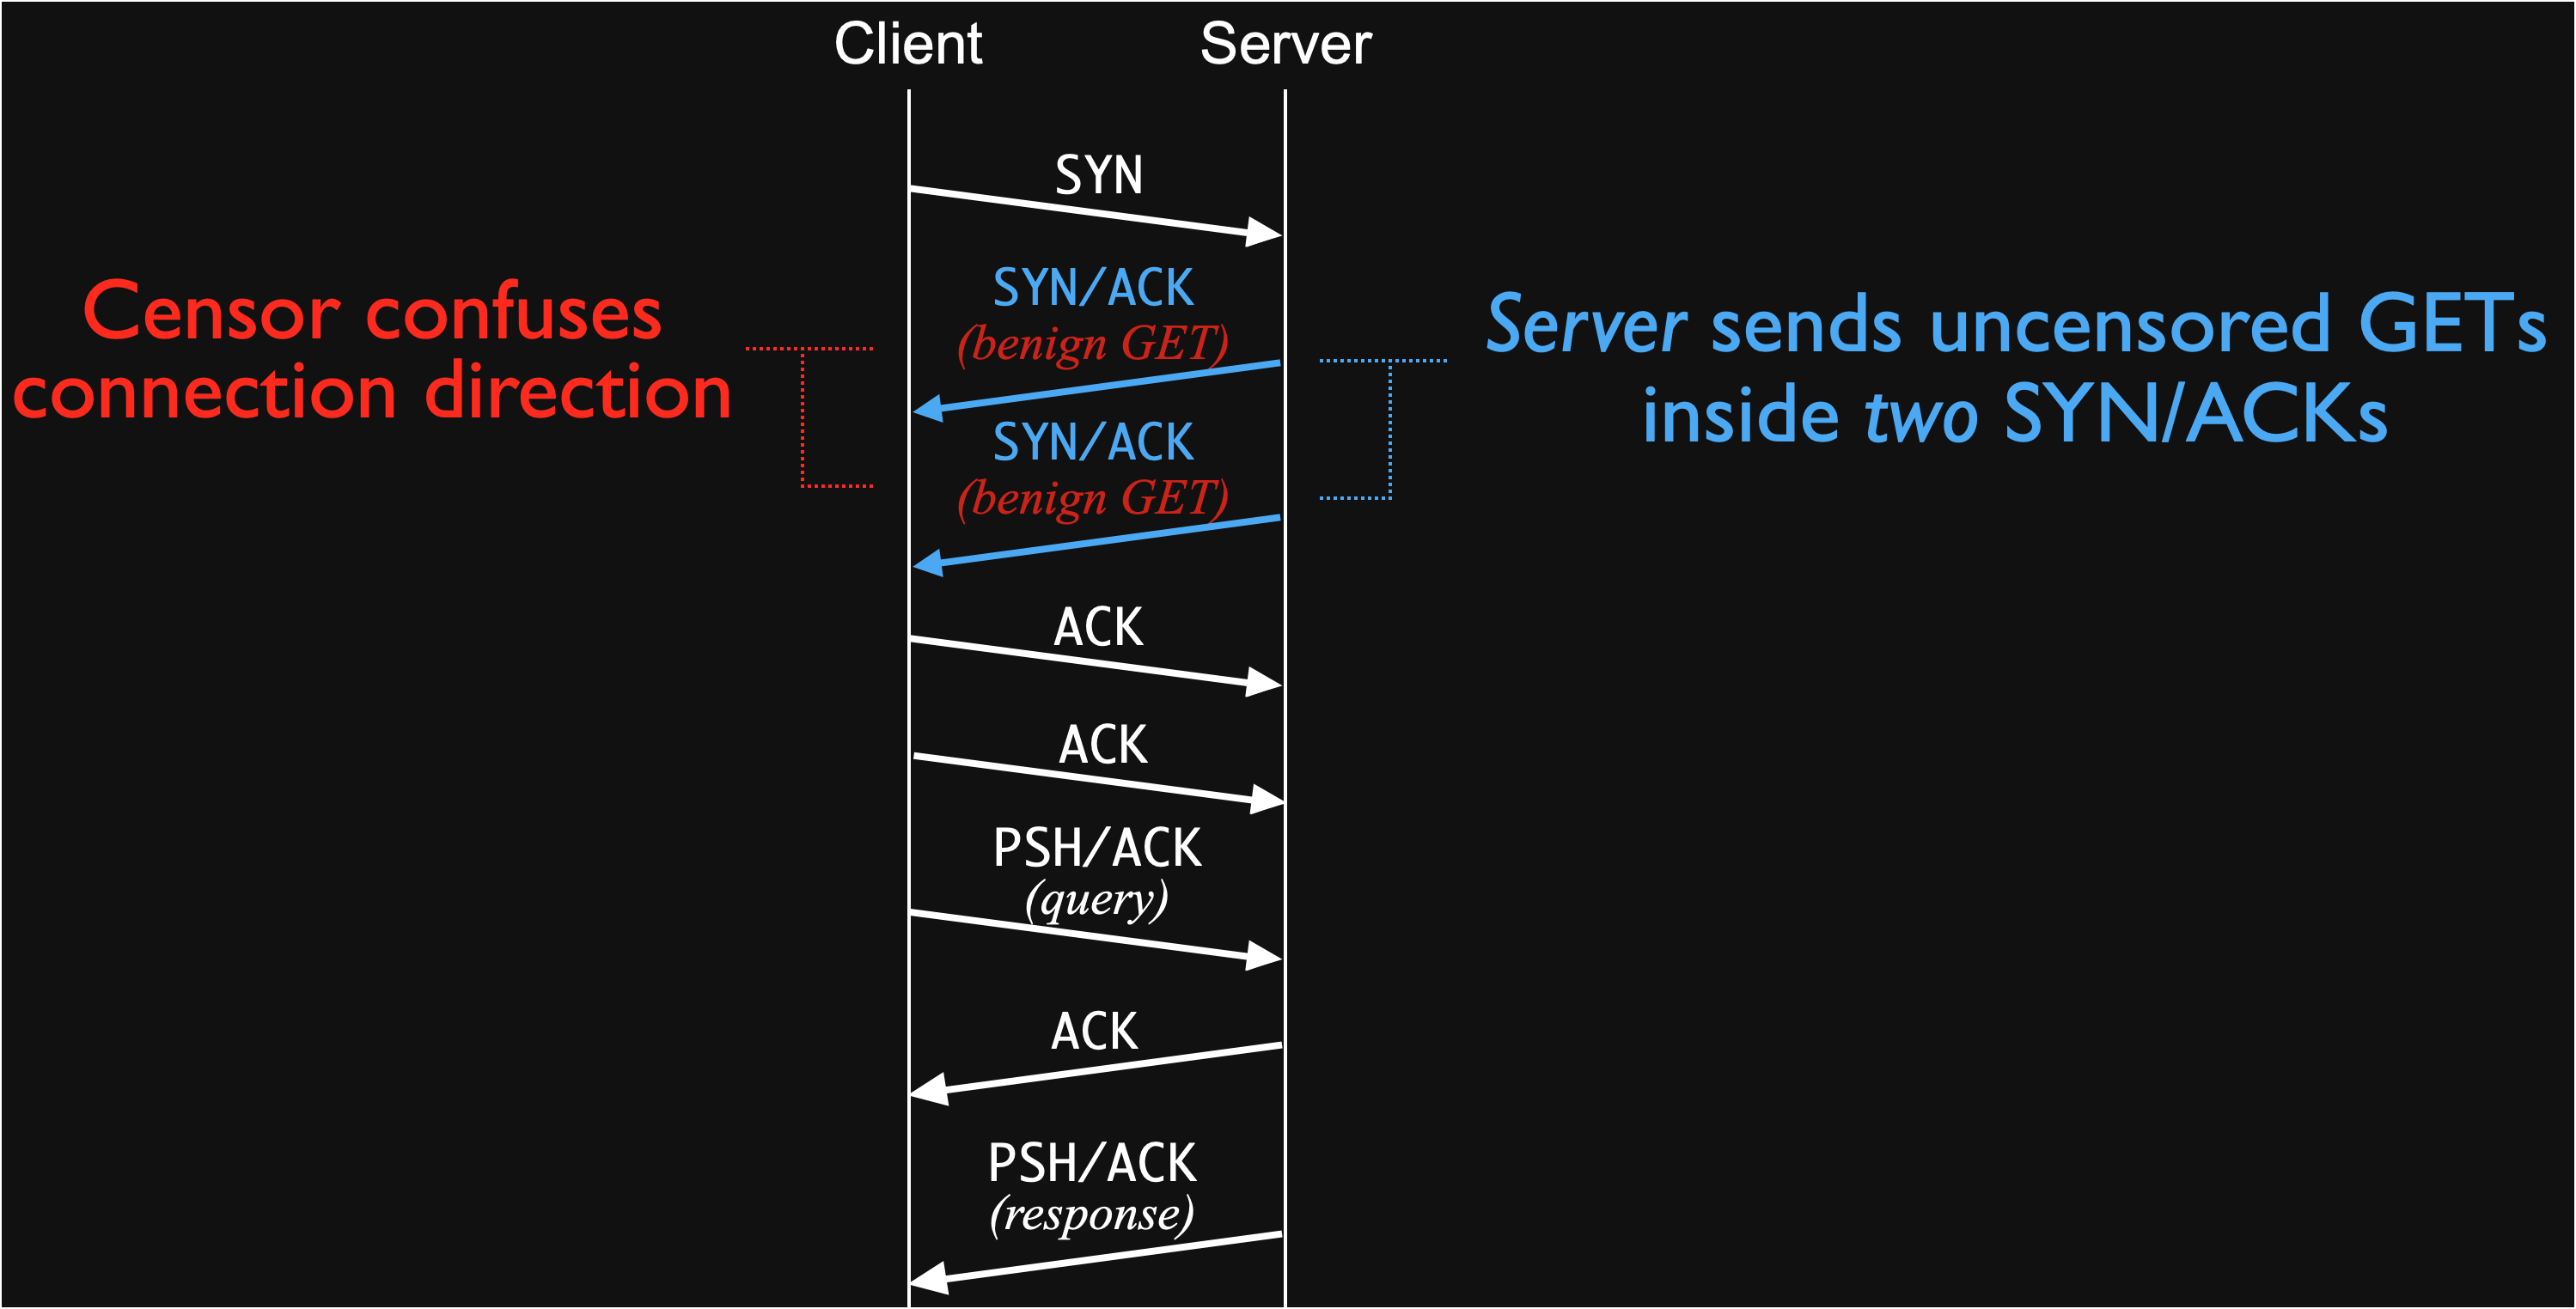 A server-side evasion strategy that is successful in Kazakhstan. The server’s strange data-bearing SYN/ACKs confuse the censor.